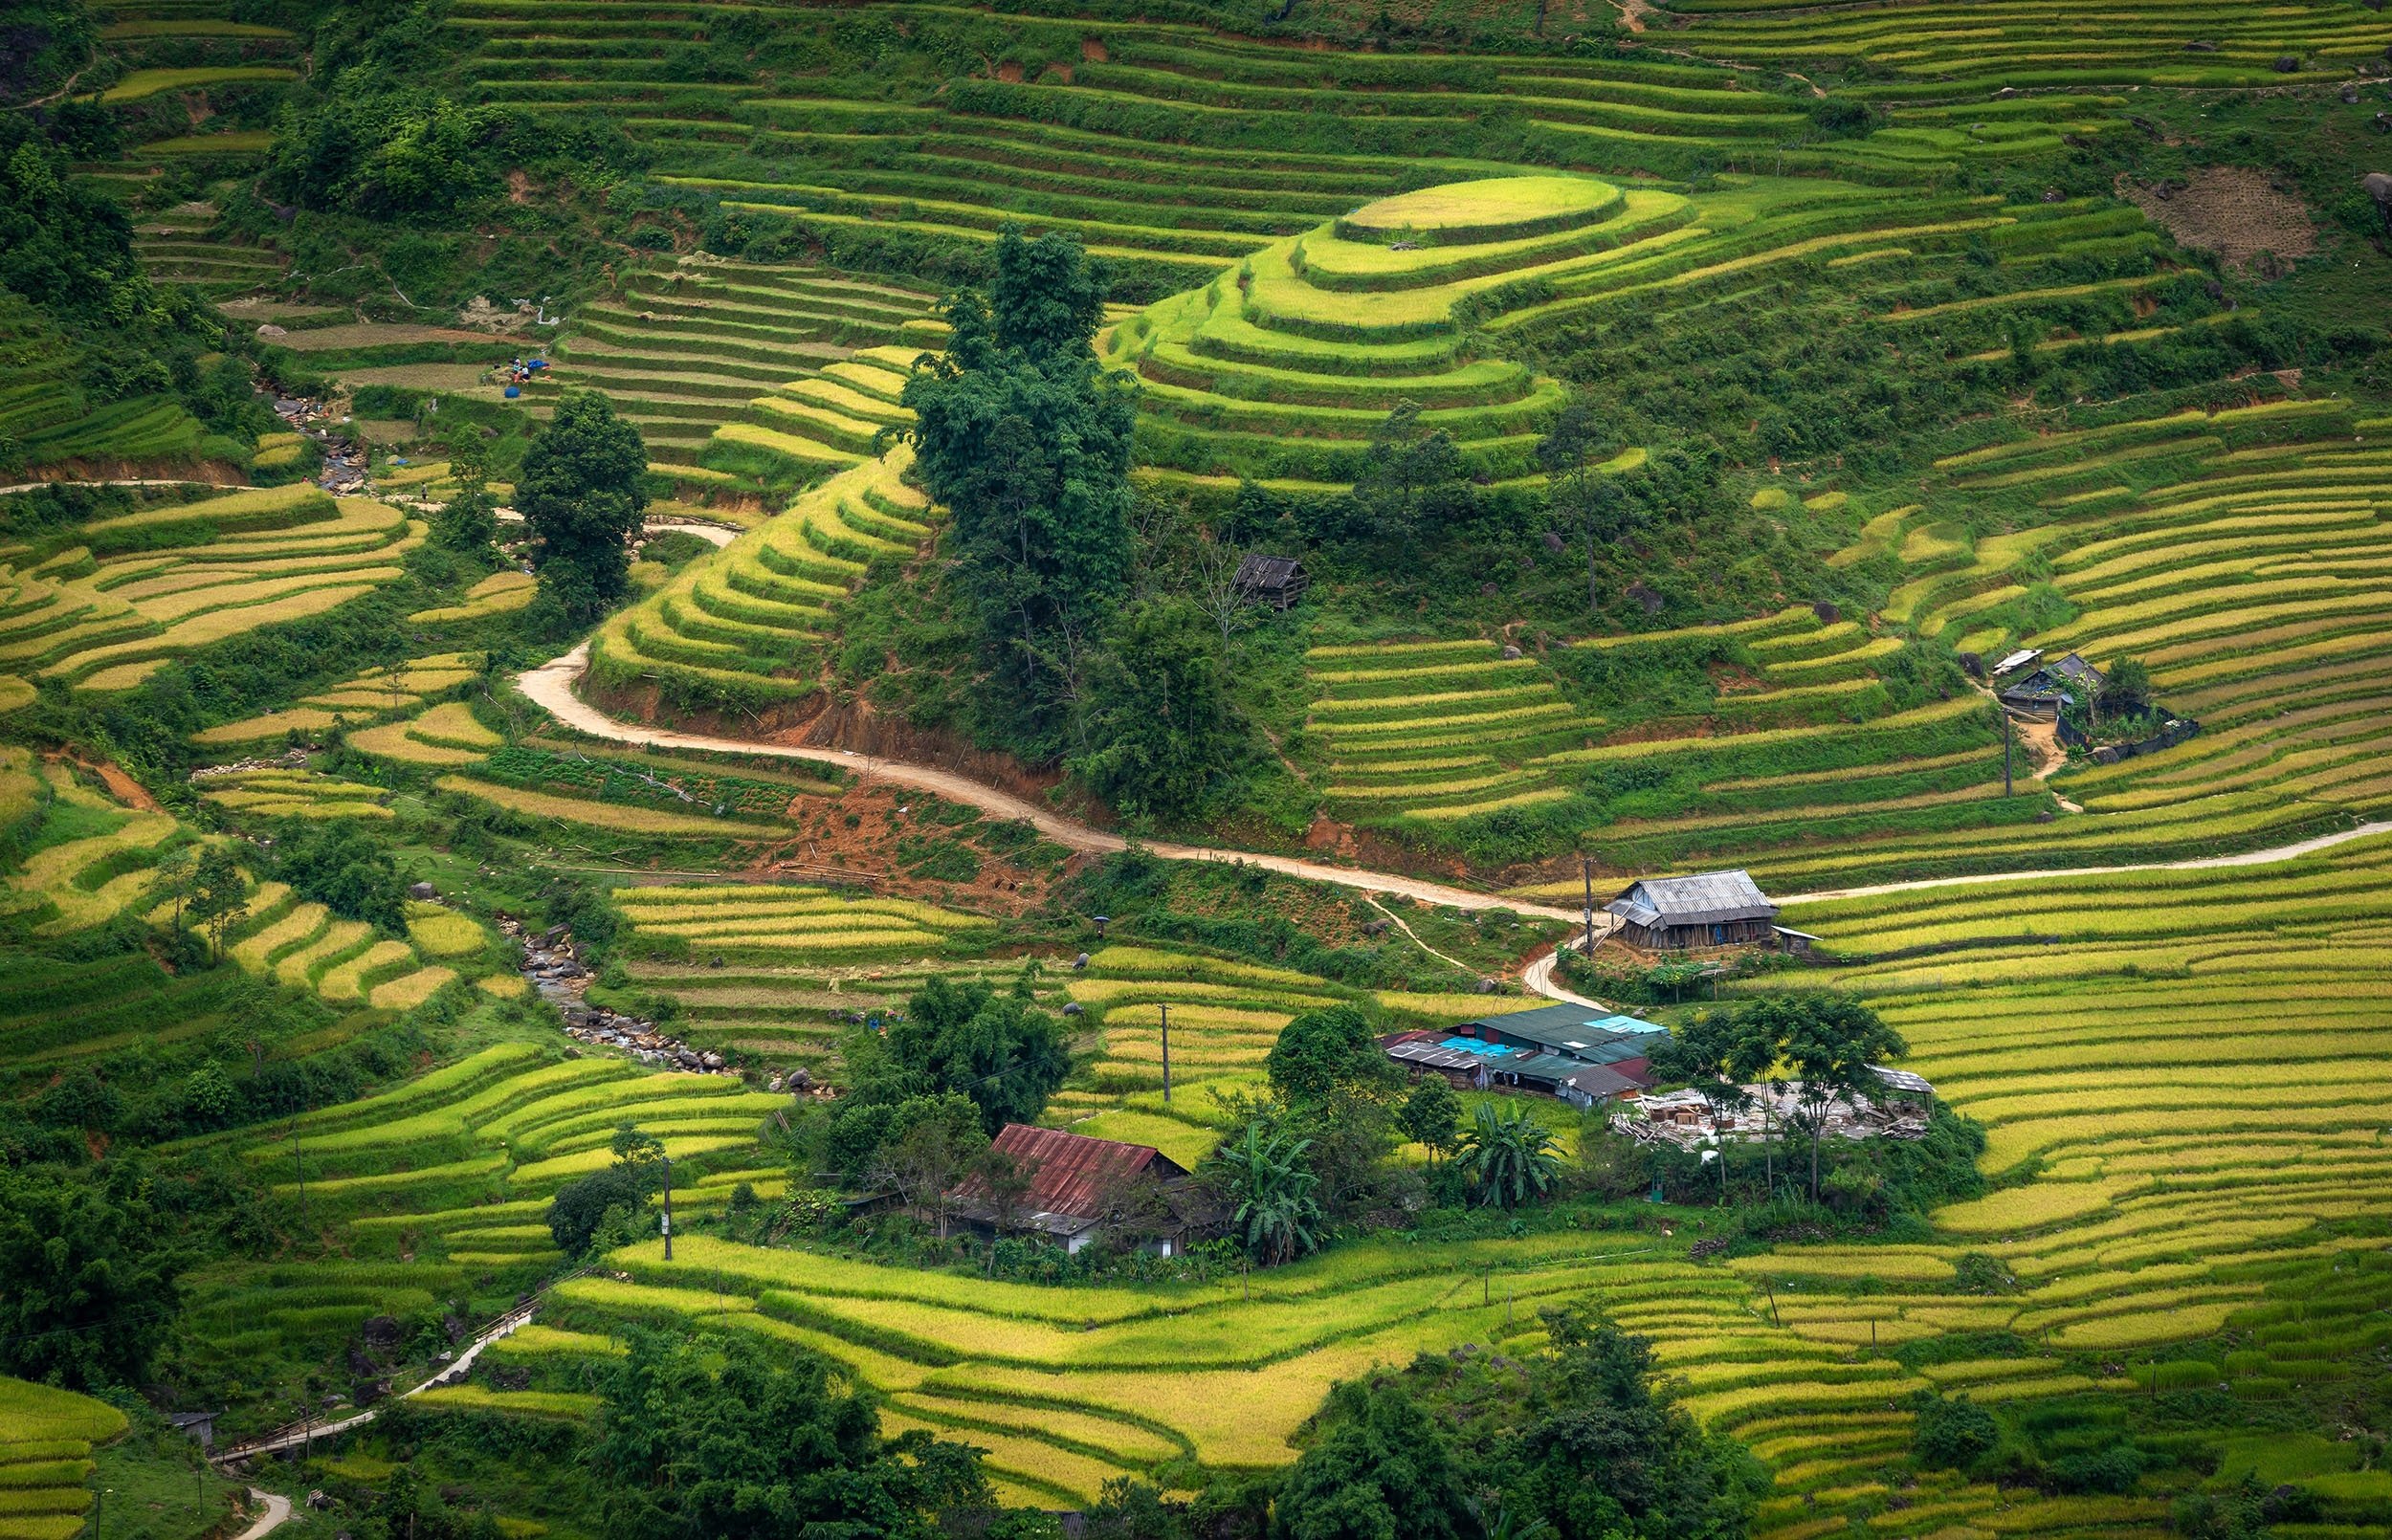 Green rice terraces can be seen in a paddy field at the town of Sa Pa, in the Hoang Lien Son mountain range, Lao Cai, Vietnam. (Shutterstock Photo)